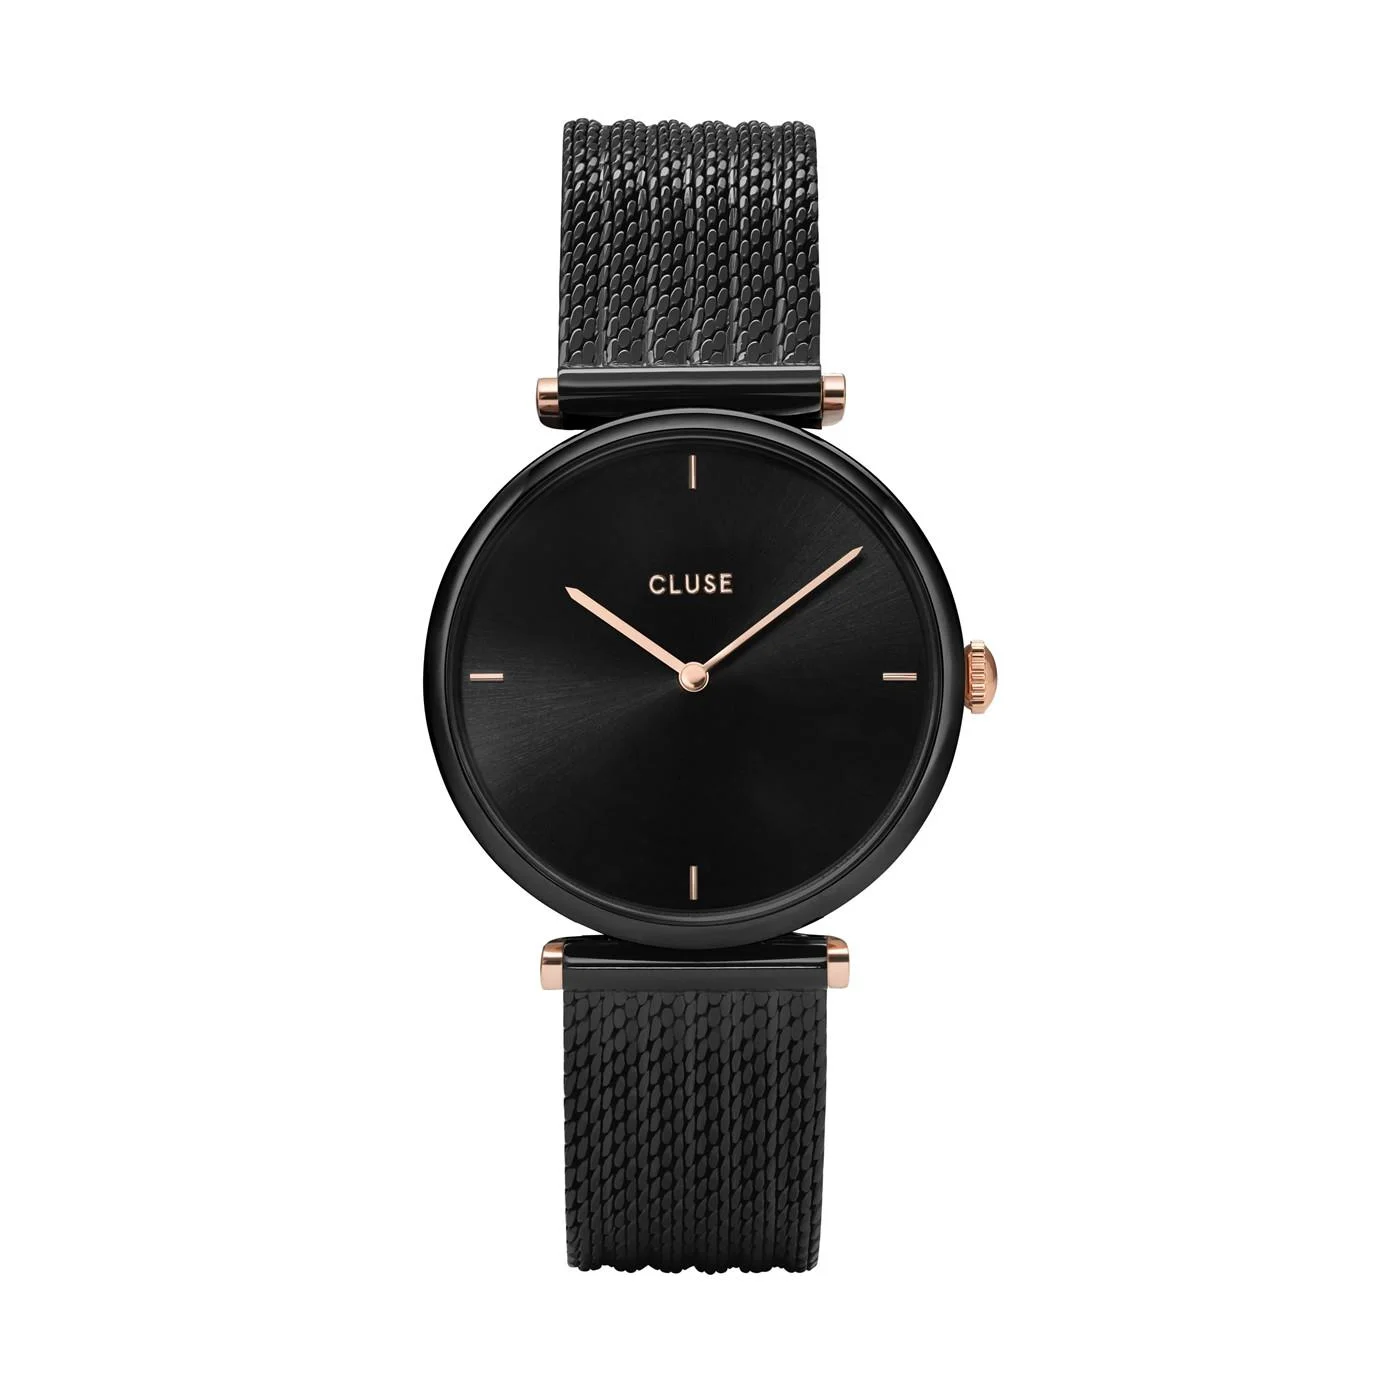 Montre connectée Withings Swiss Made WI-70053801